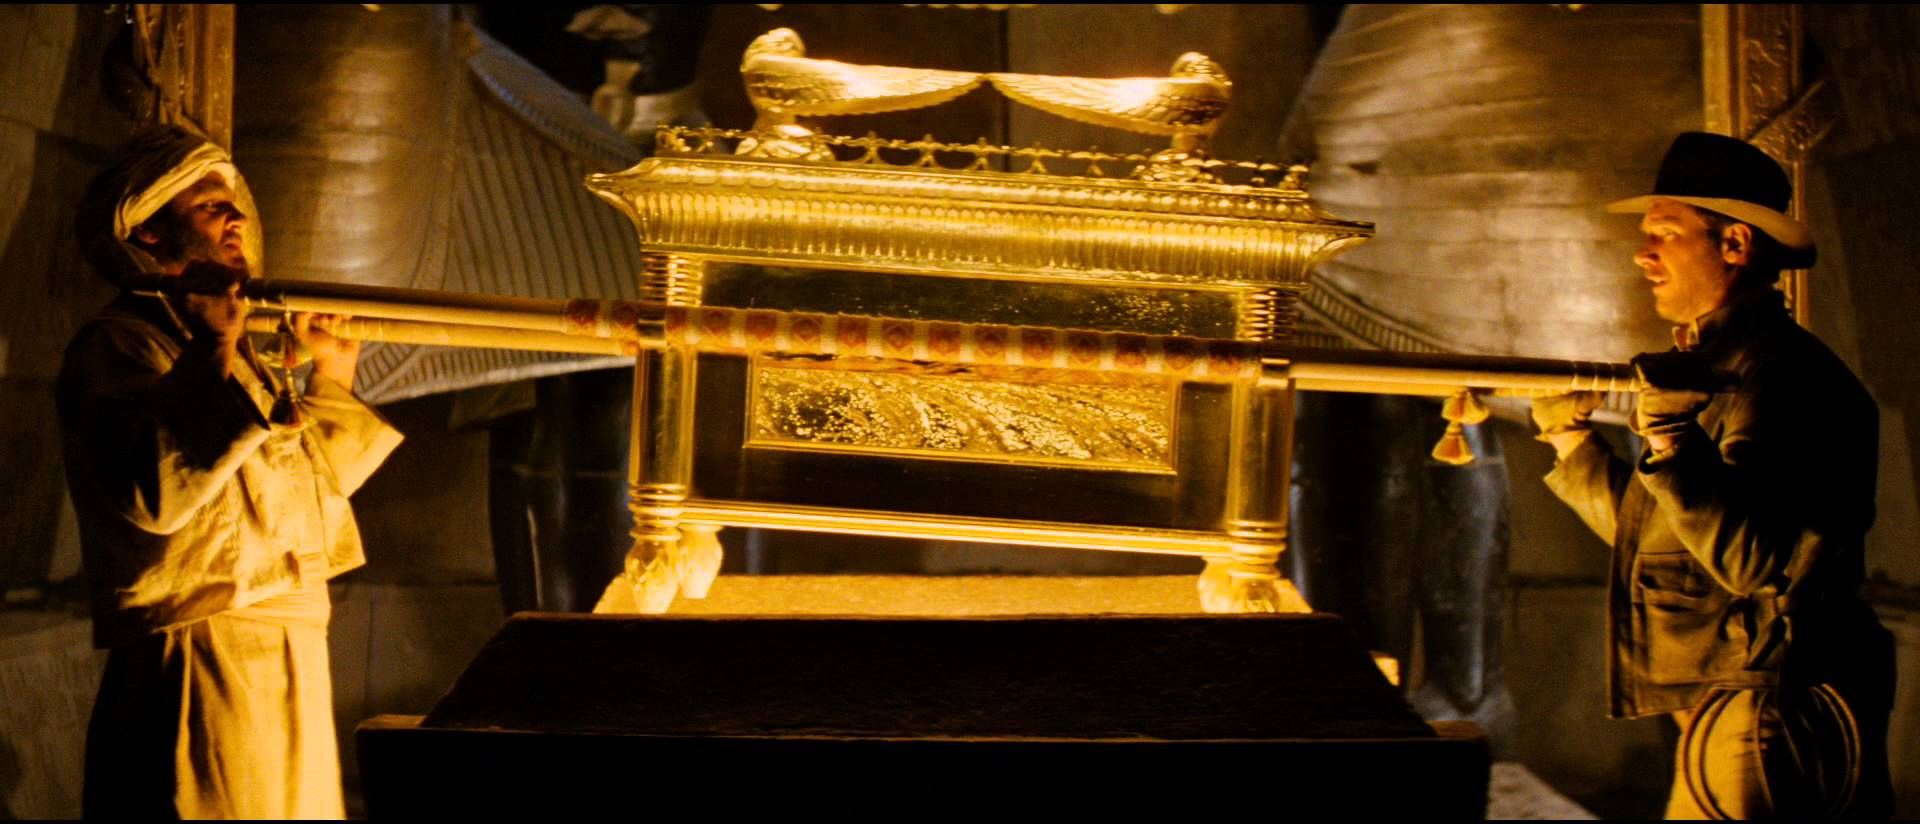 The ark of the covenant, Raiders of the Lost Ark (1981)